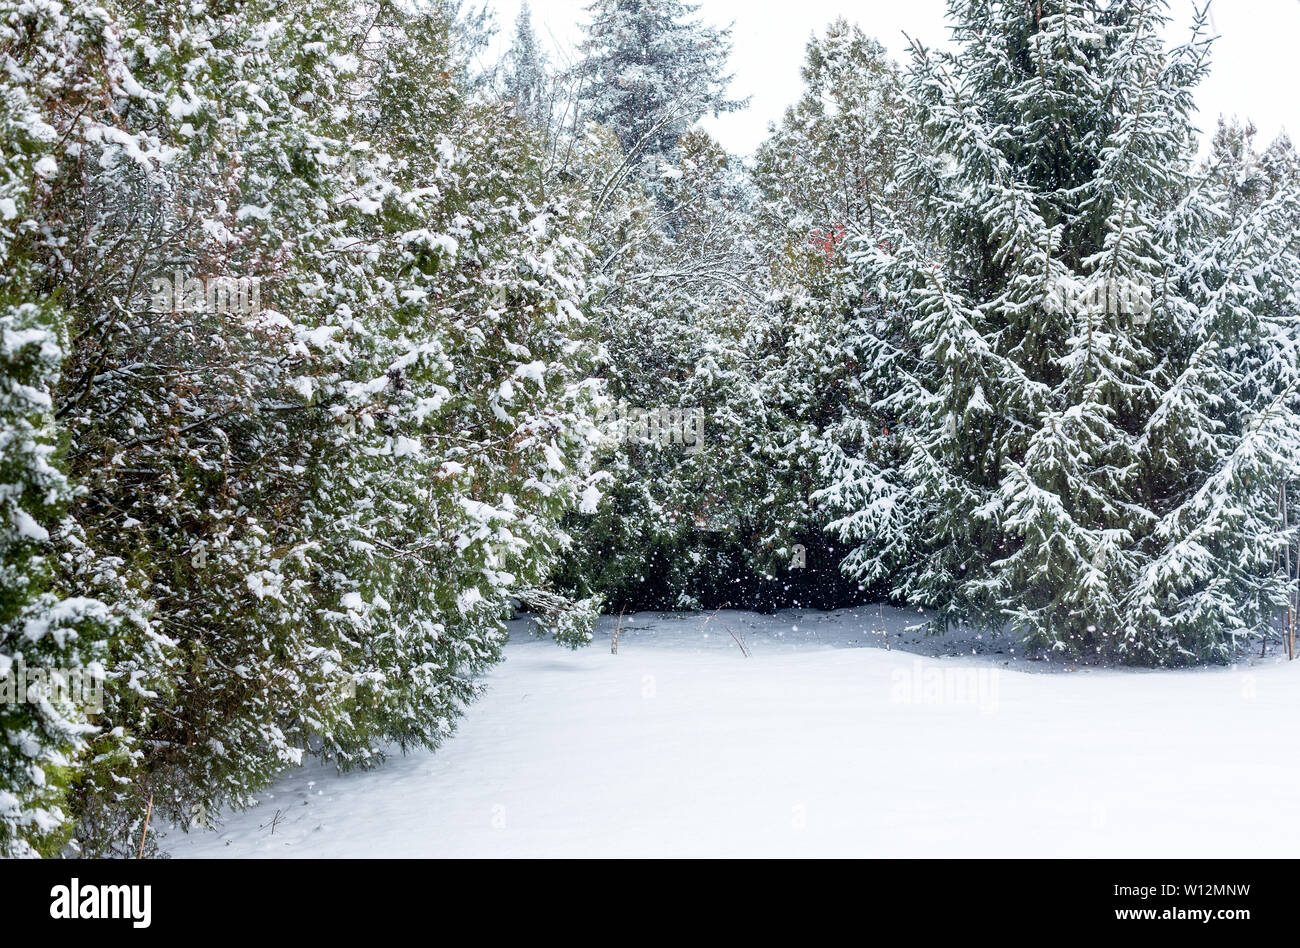 Evergreen thuja, spruce and whole house yard covered with fluffy white snow. It is snowing on winter day Stock Photo